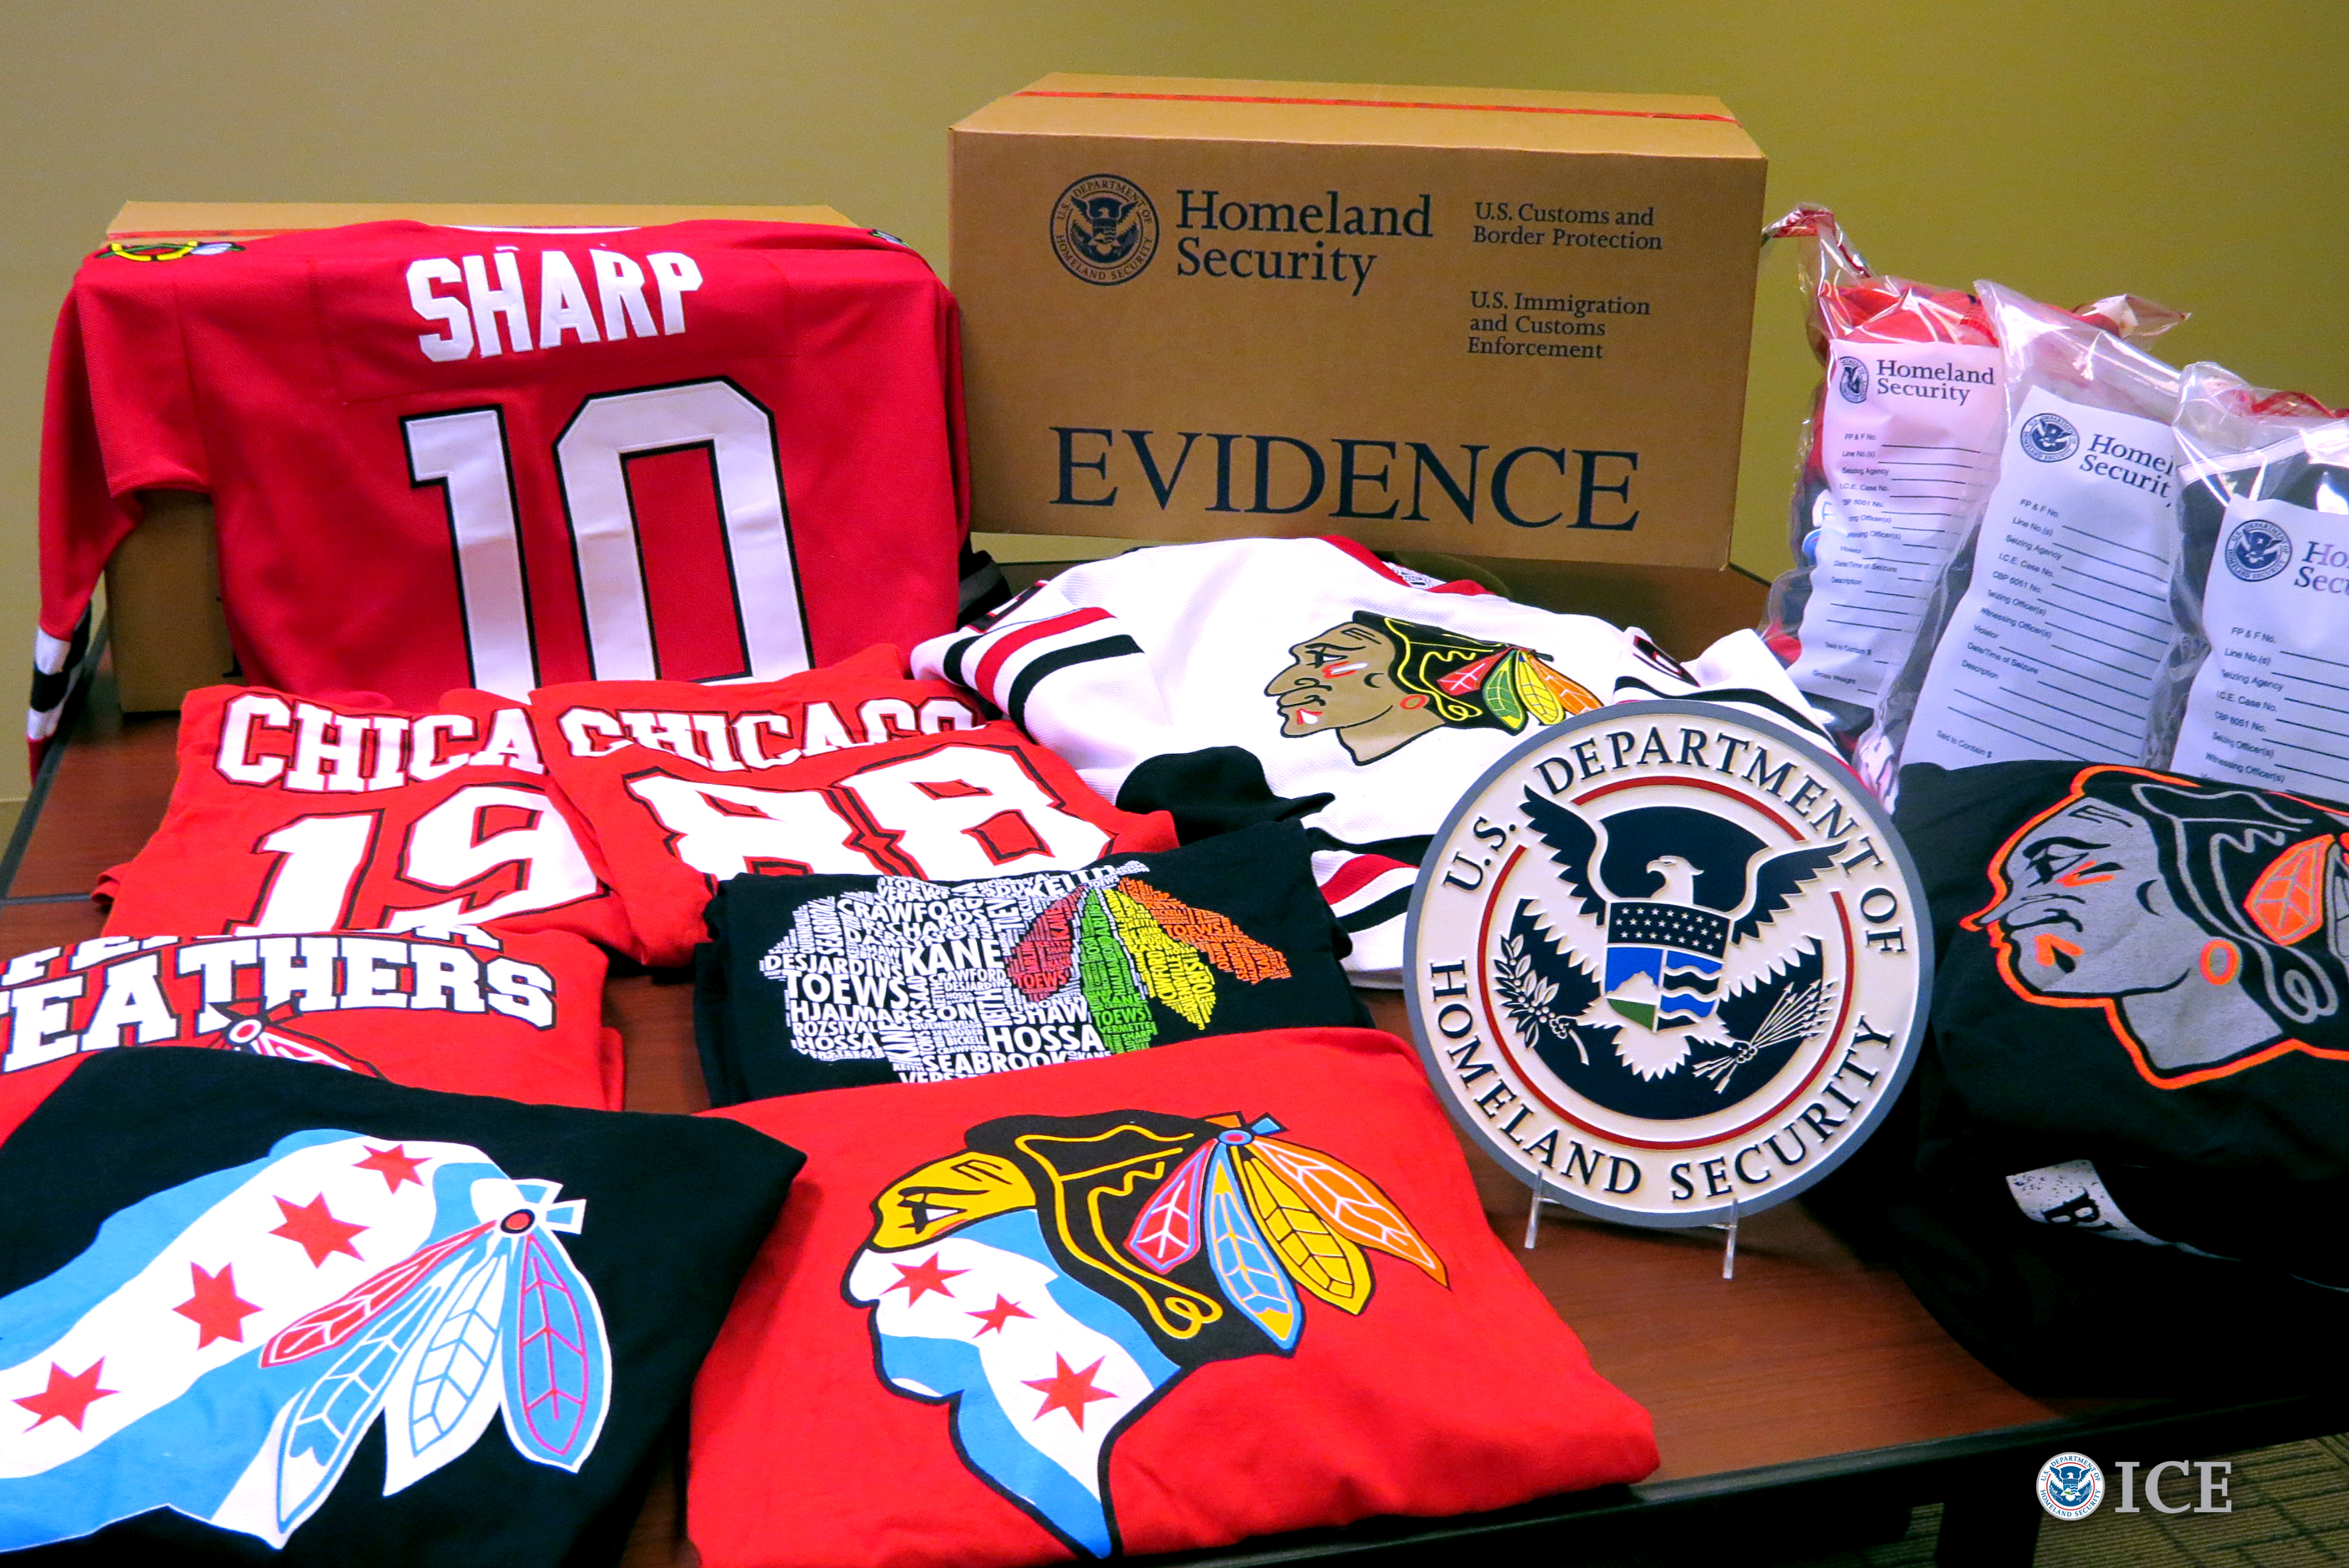 The enforcement initiative, dubbed Operation Team Player, resulted in the seizure of 4,376 items, including fake jerseys, hats, t-shirts, jackets and other souvenirs. The $181,215 value is based on the manufacturer’s suggested retail price of the counterfeit NHL merchandise.